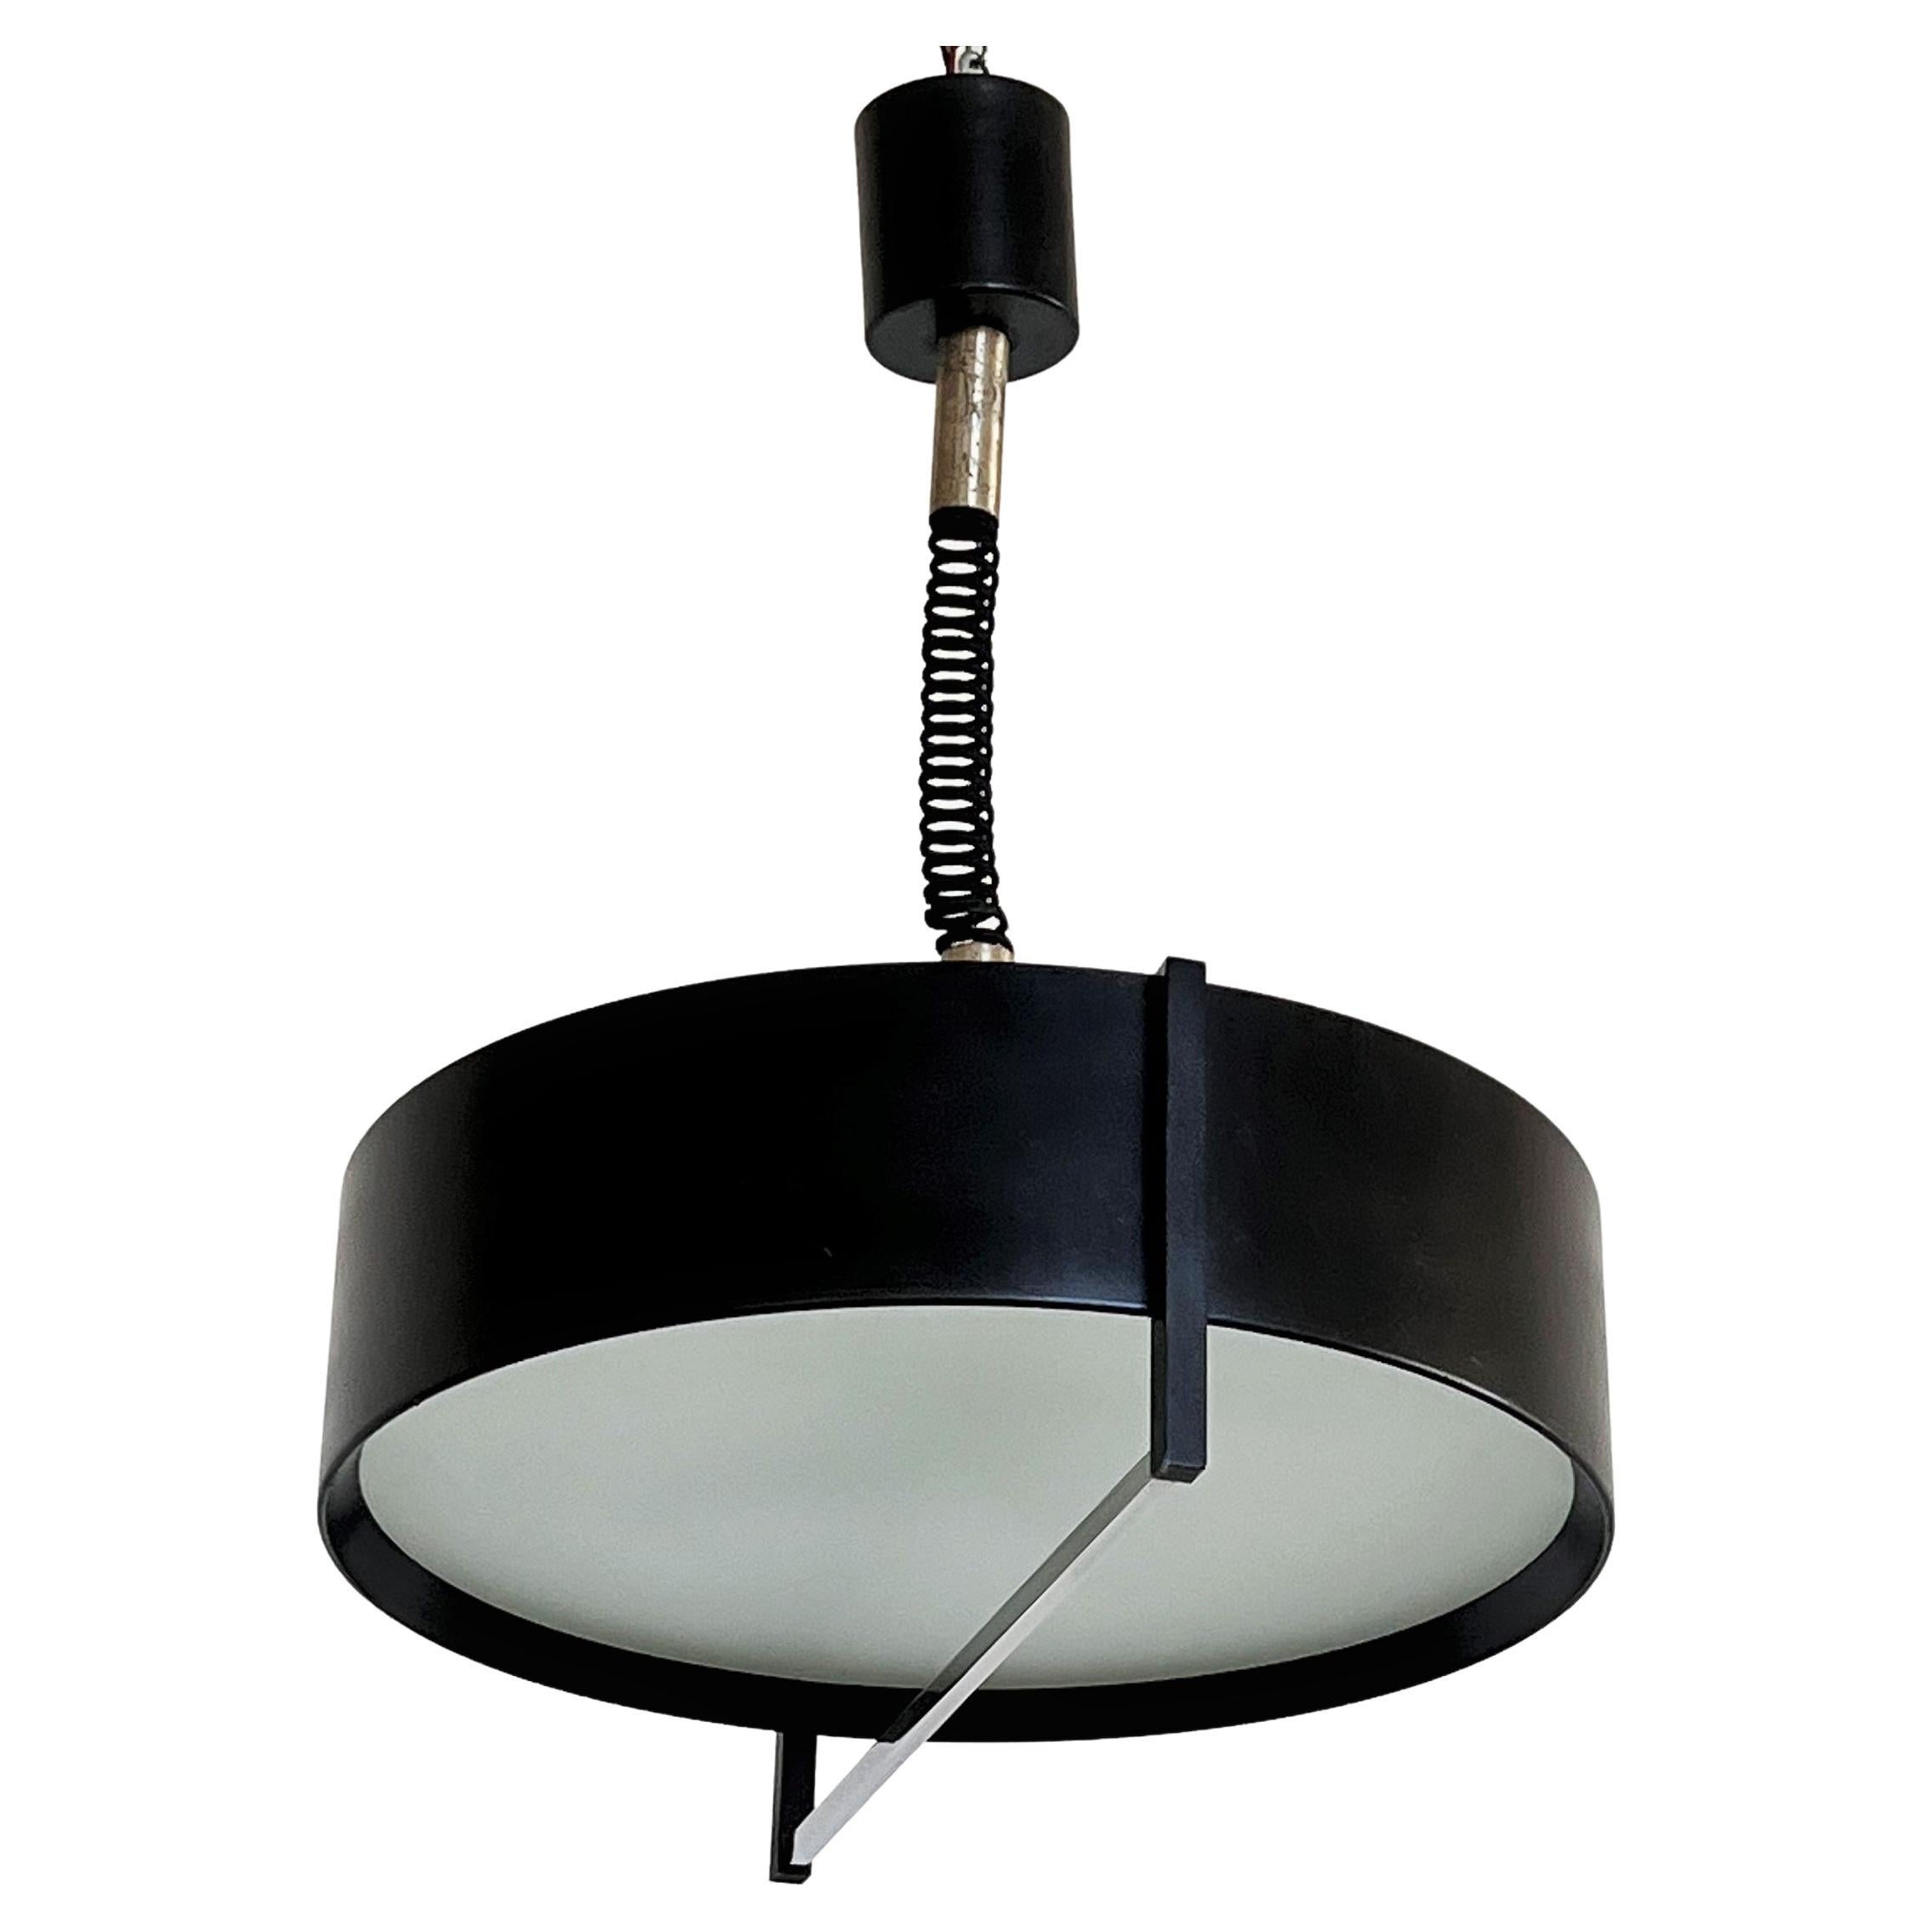 This rare Italian pendant lamp is in very good original vintage condition. Manufactured in the 1960s.
The body is black painted metal with normal vintage traces but no defects. The lower rod to adjust the lamp is made of chrome plated brass. 
The